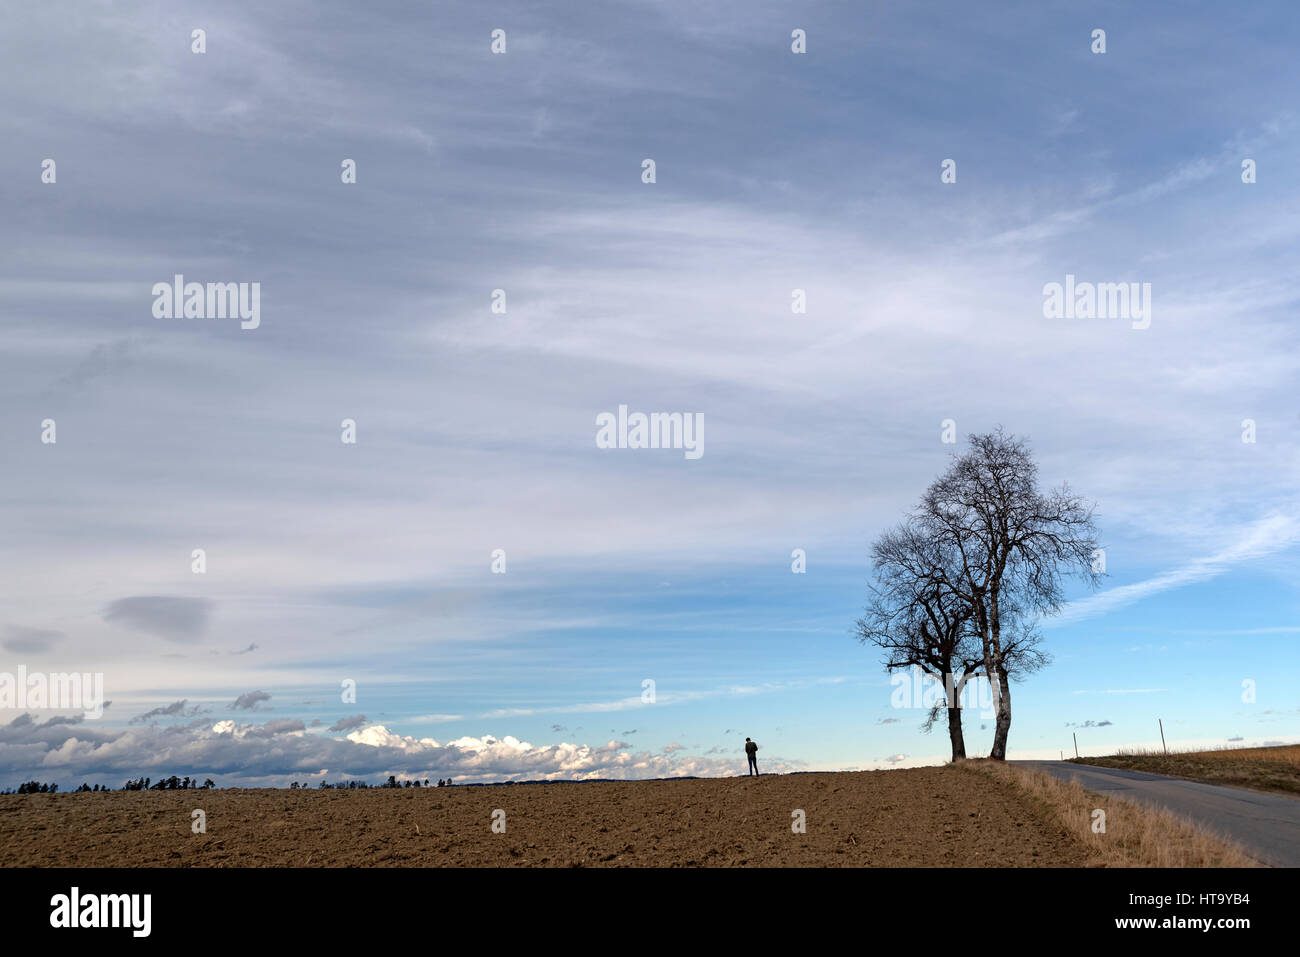 Trees with person on fiel with blue, clouded sky Stock Photo